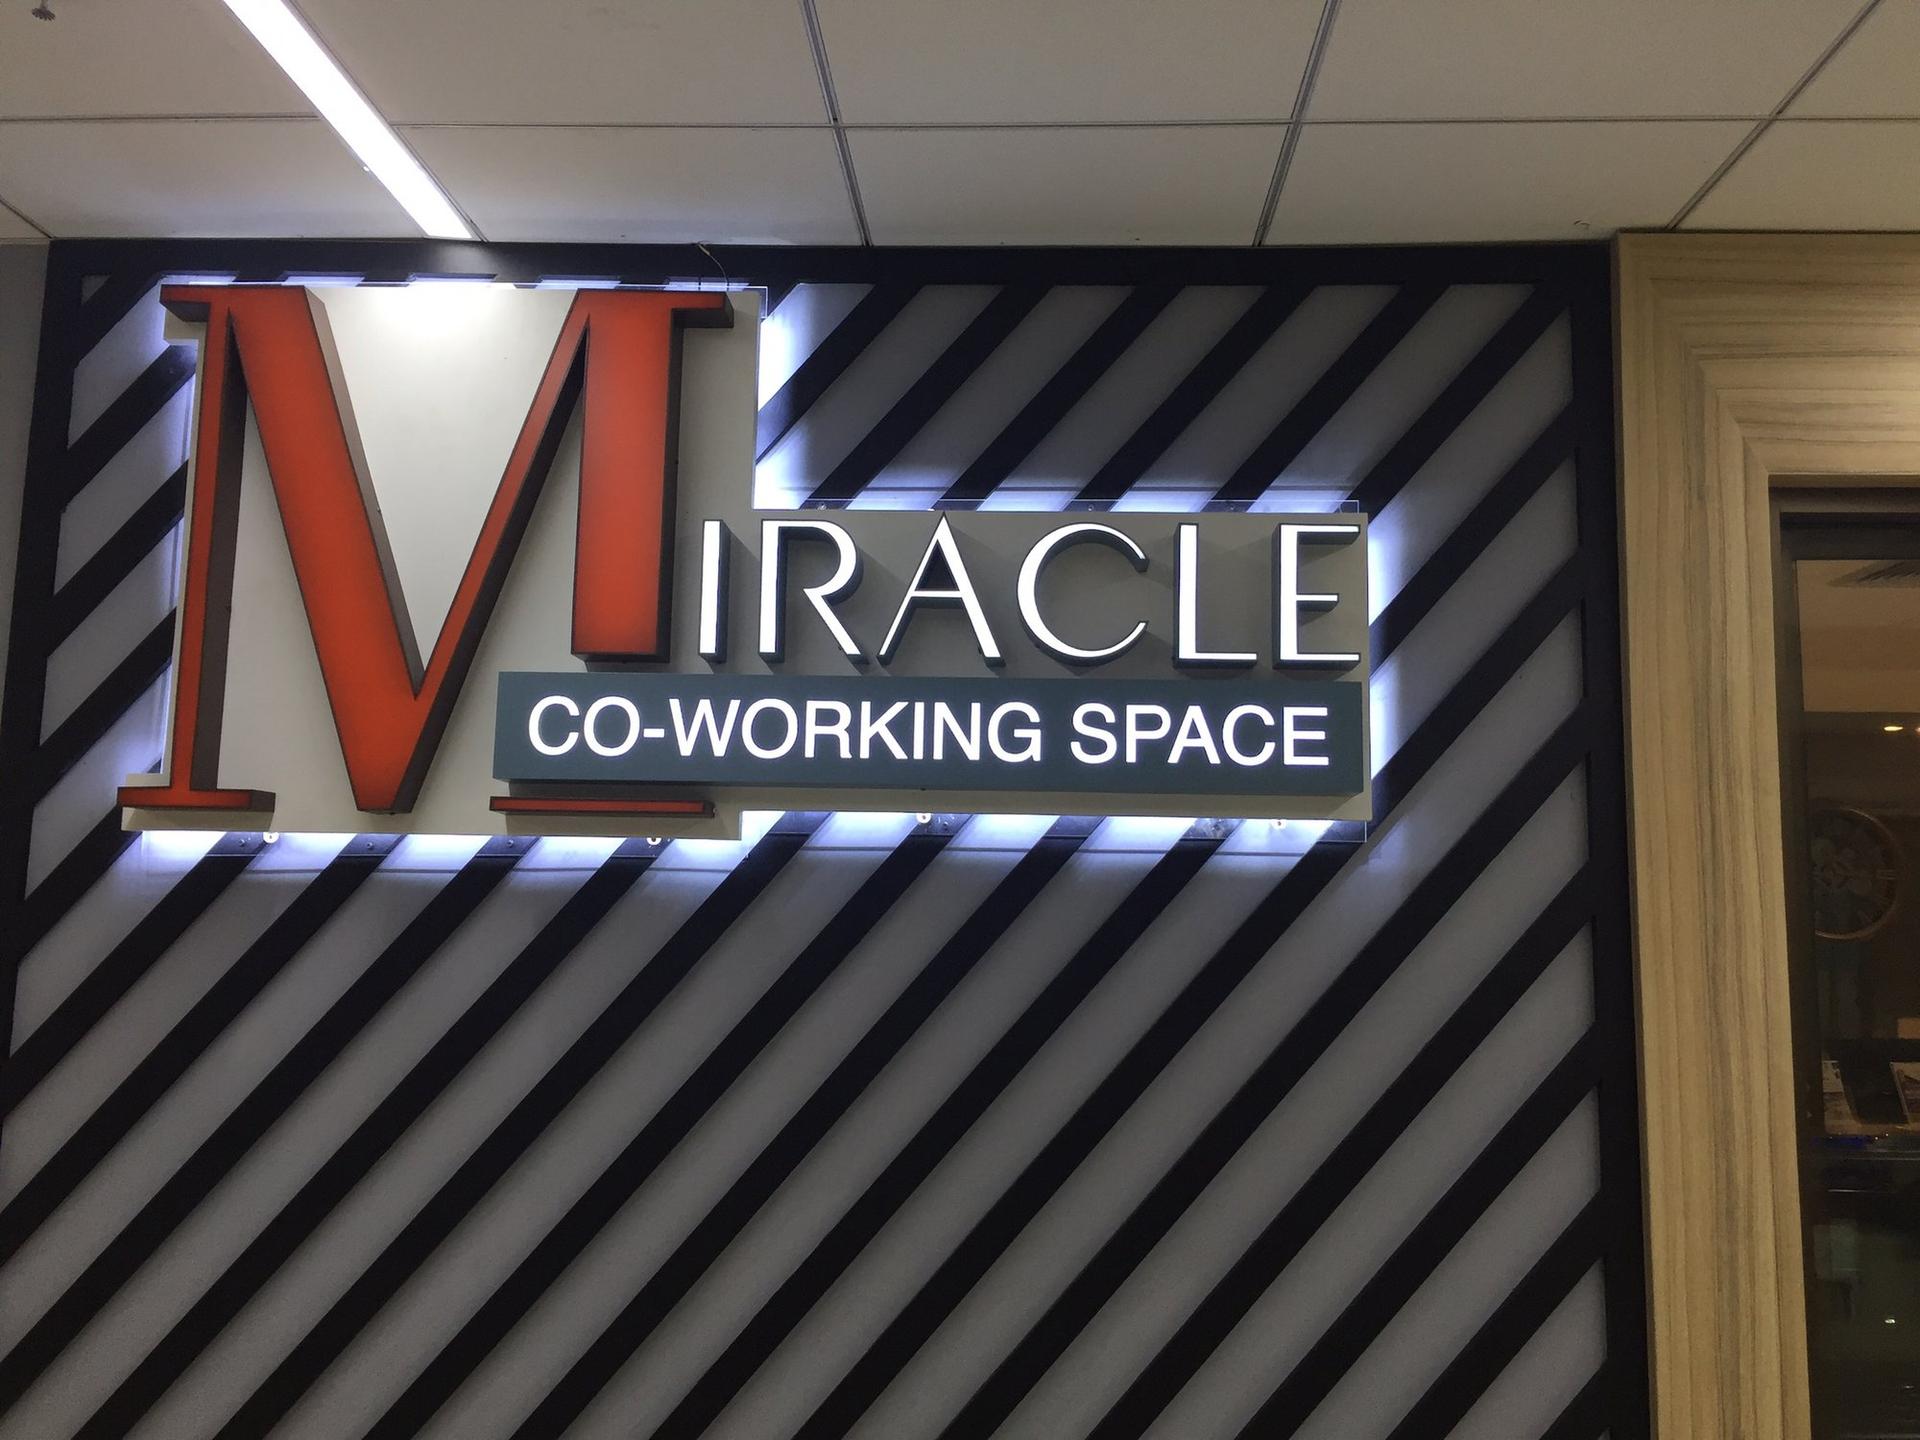 Miracle Co-Working Space image 9 of 44